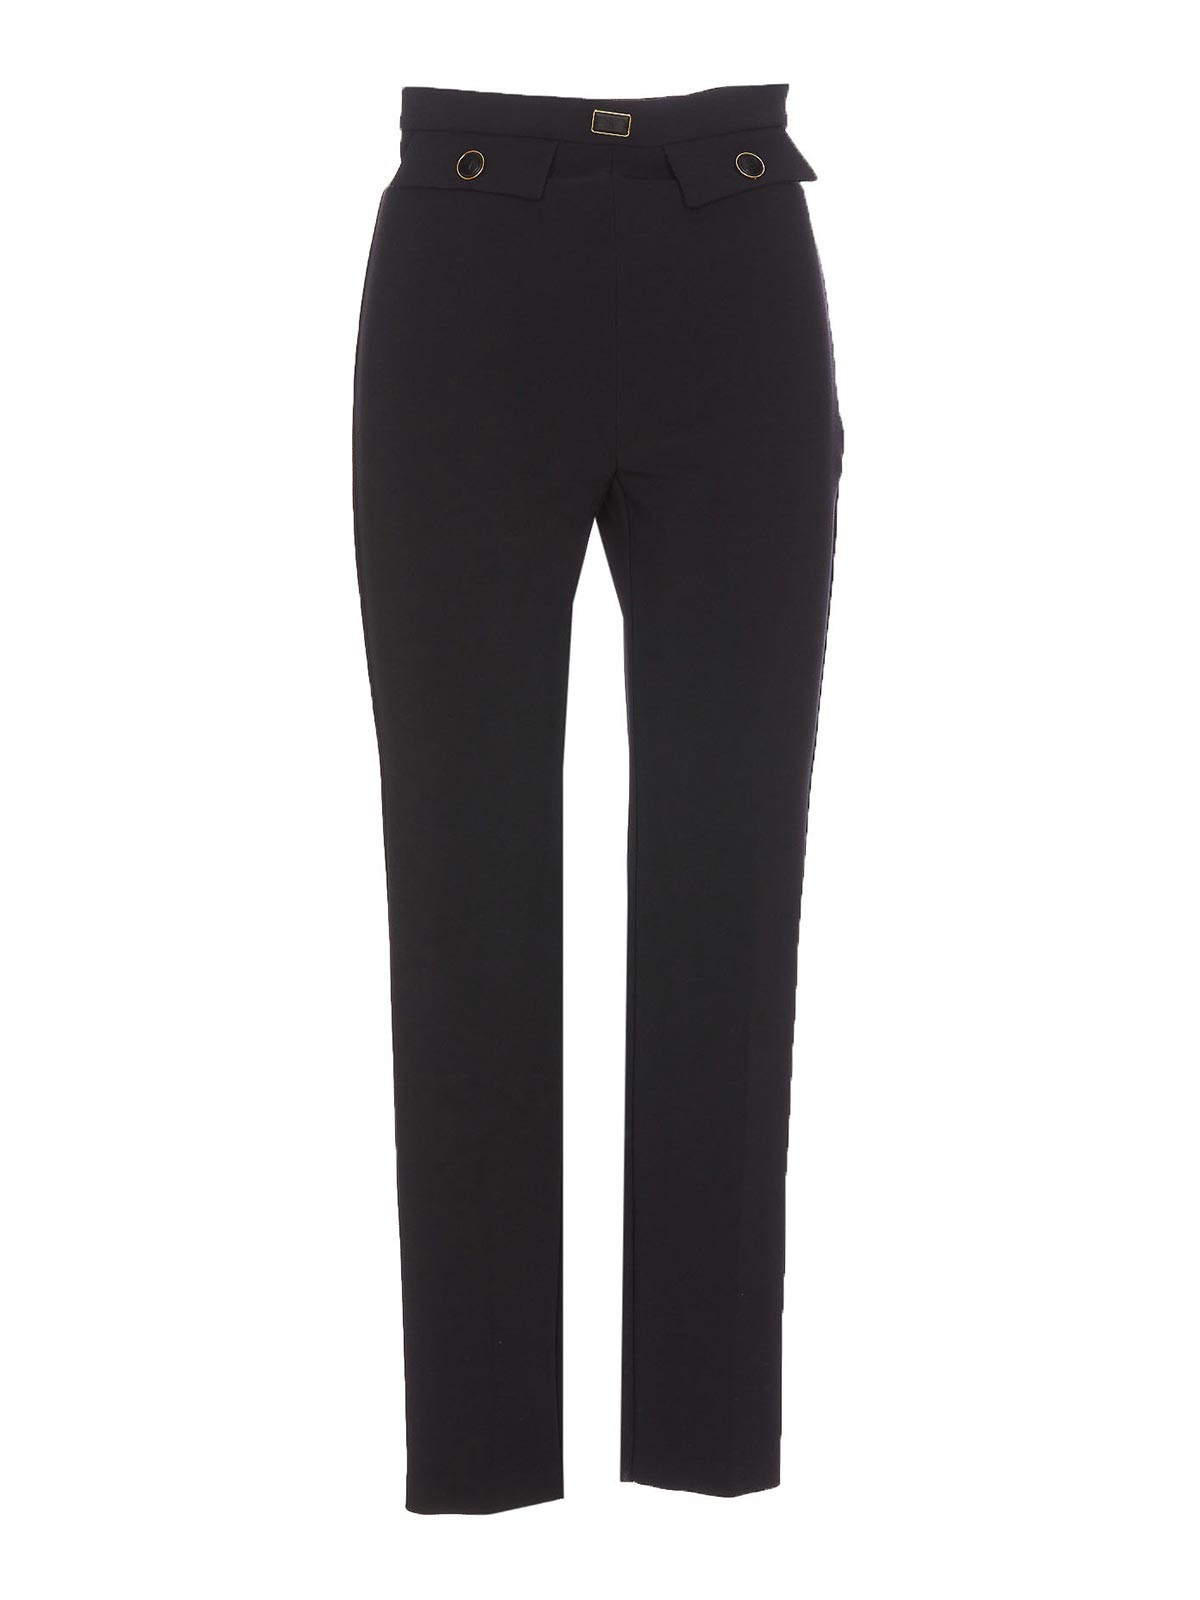 Elisabetta Franchi Black Pants With Lateral Zip And Hook